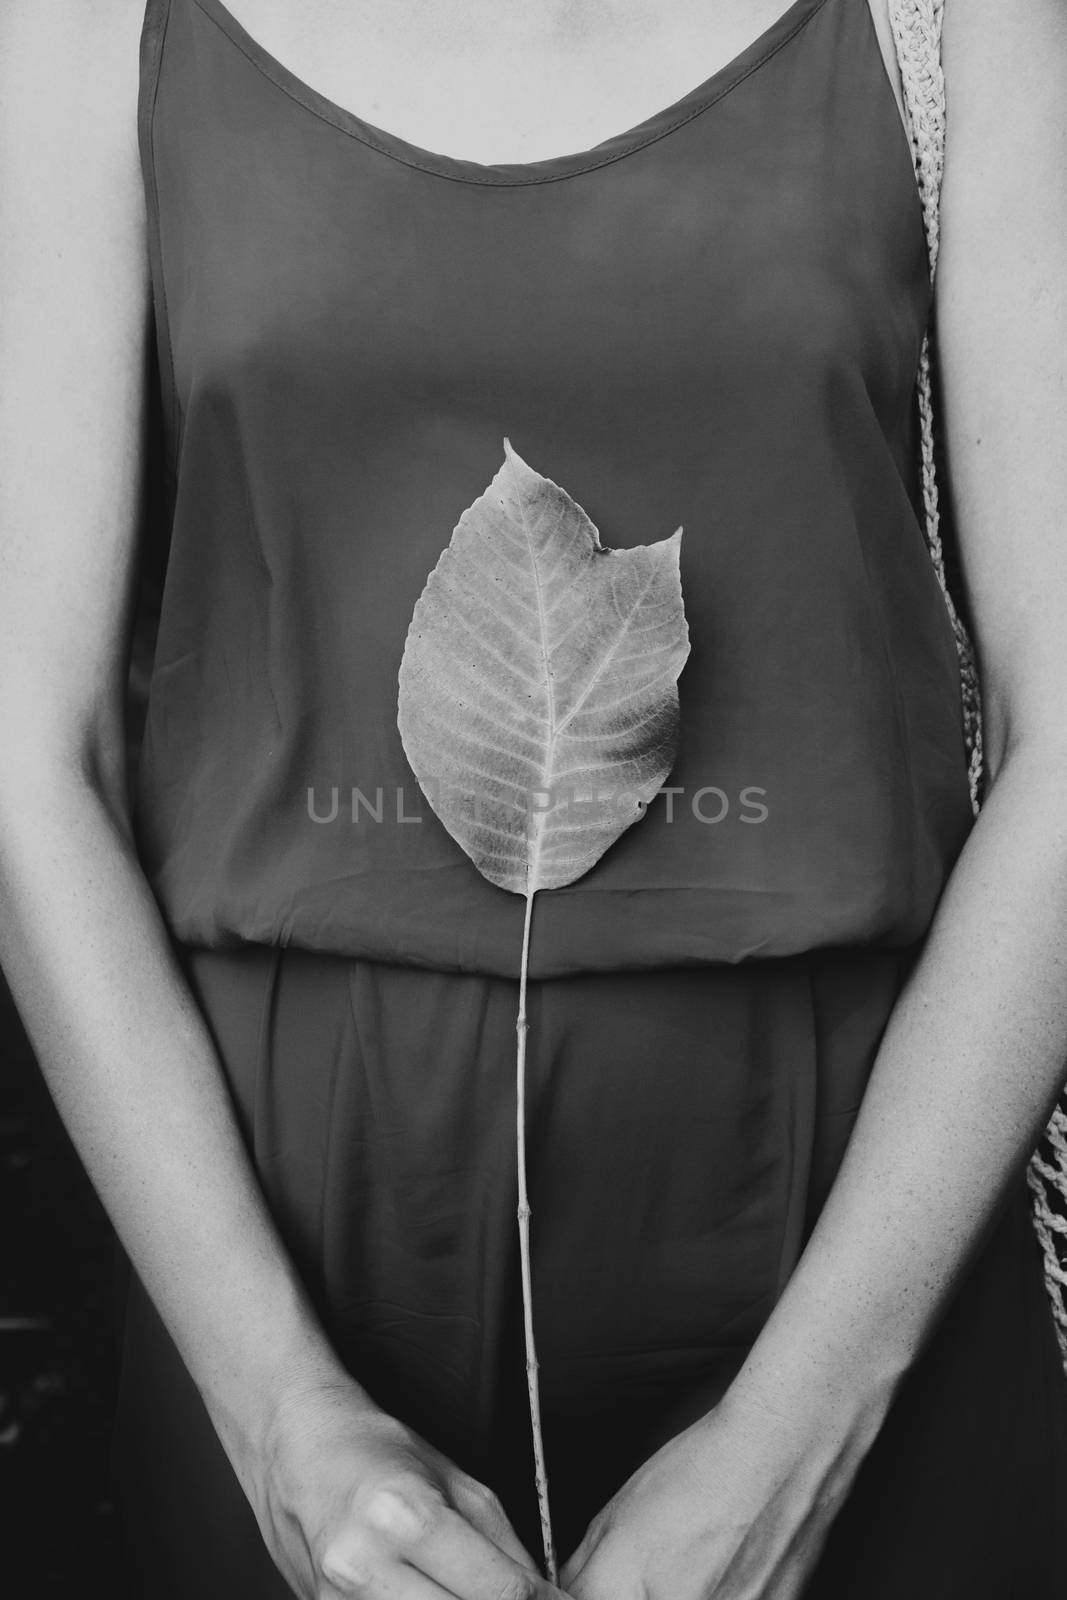 Woman in red dress holds an exotic green leaf, low key monochrome. Appreciating, loving nature concept: female with a beautiful leaf on her body